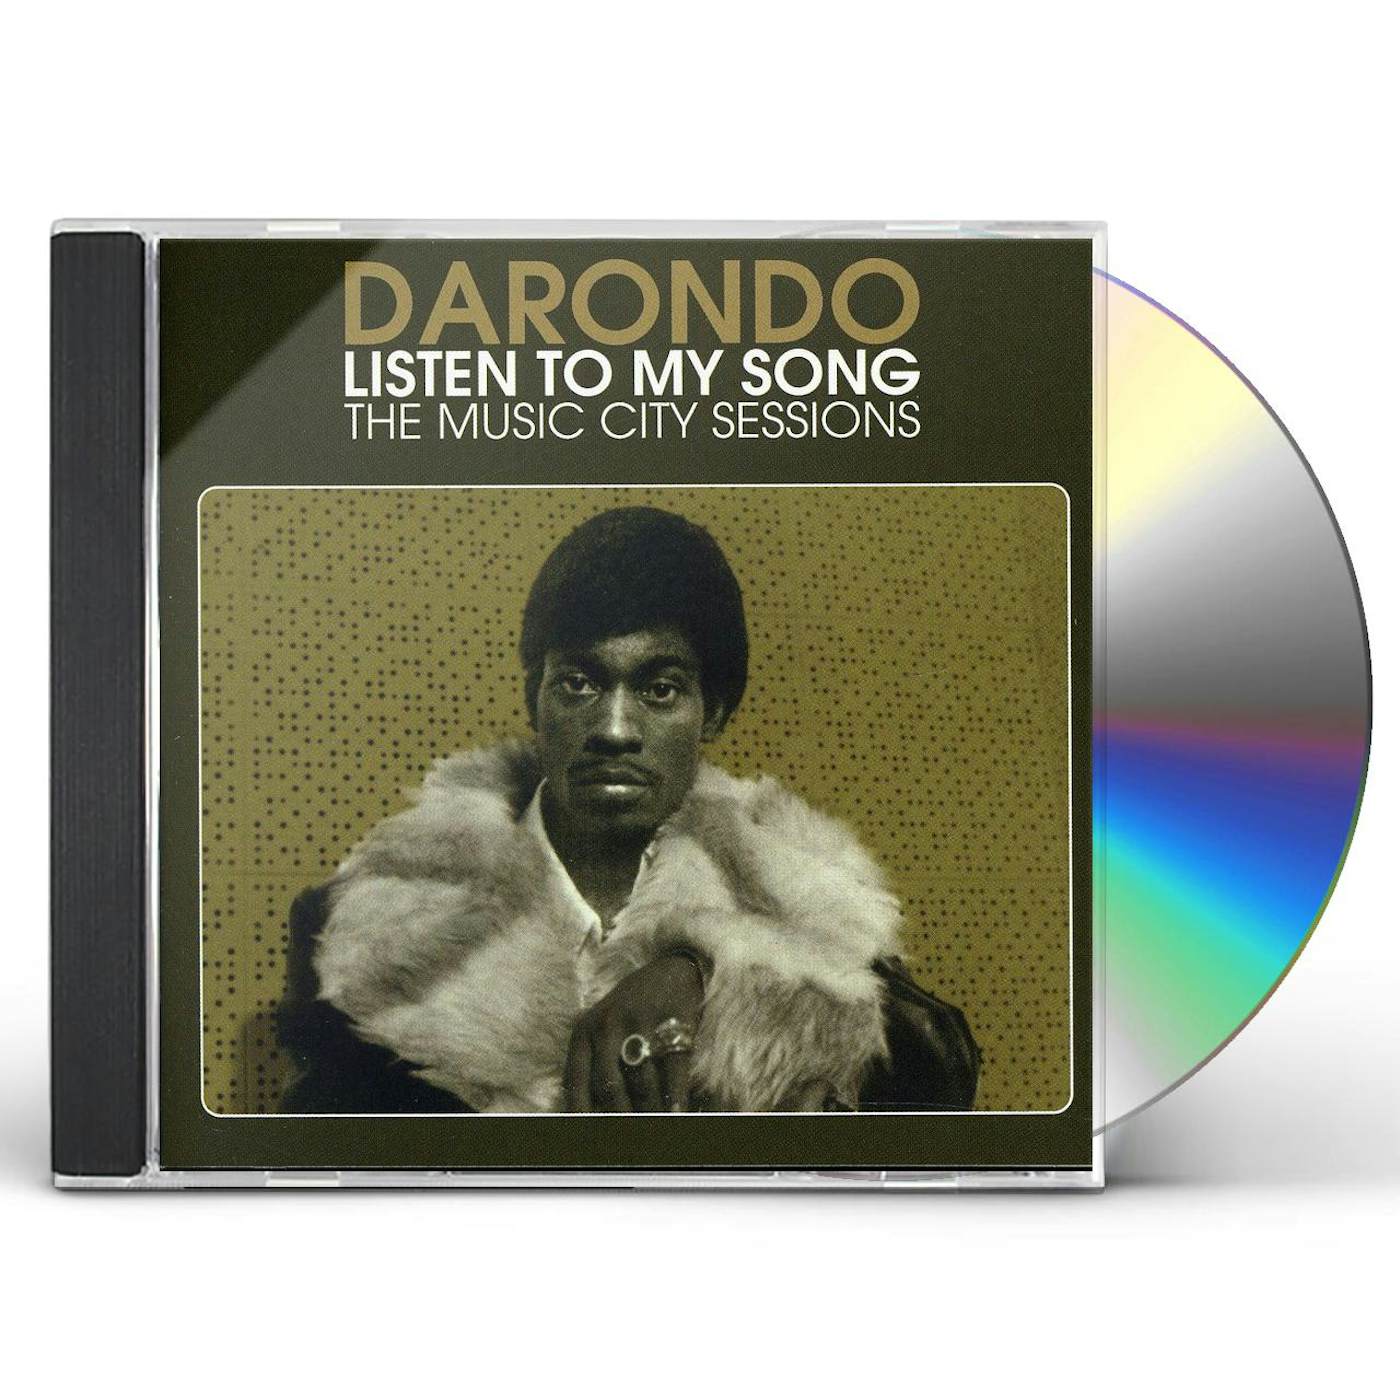 Darondo LISTEN TO MY SONG: THE MUSIC CITY SESSIONS CD